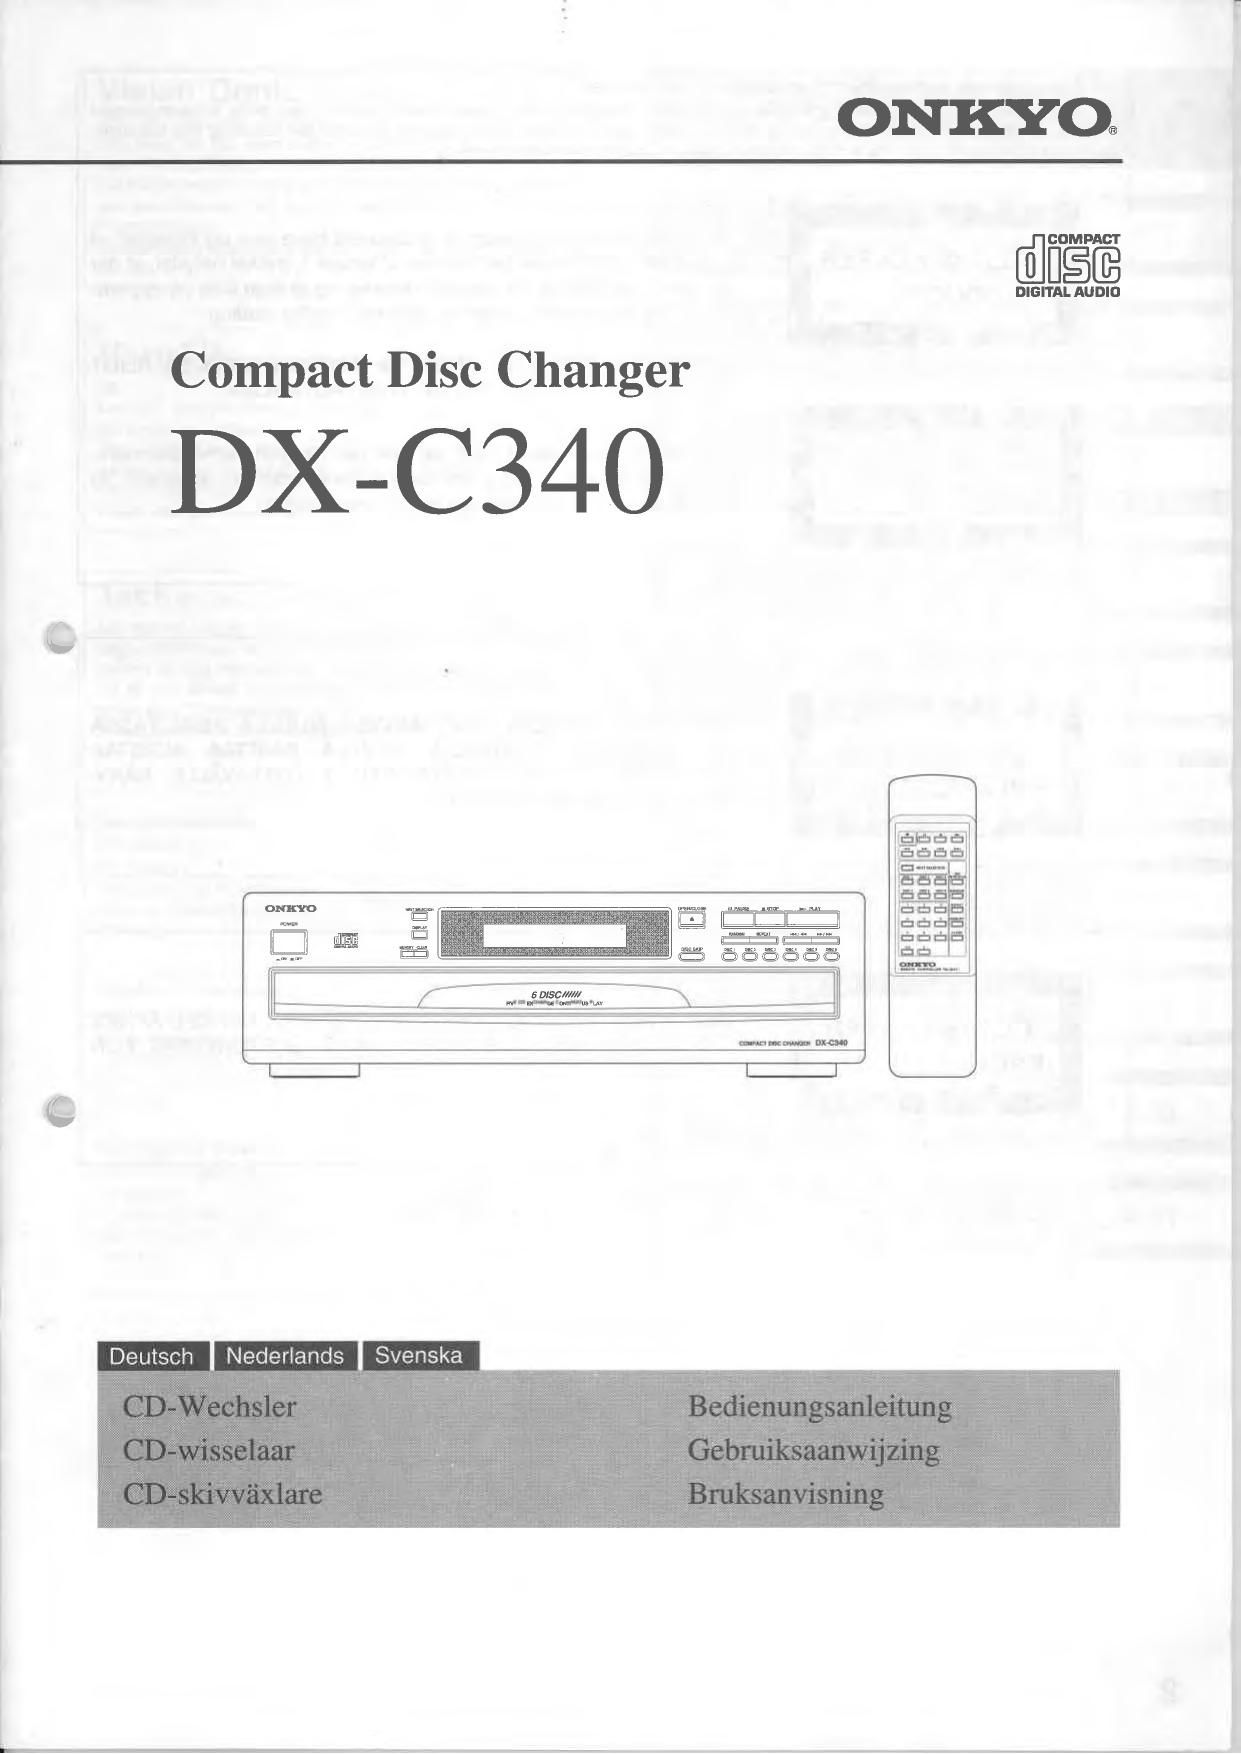 Onkyo DXC 340 Owners Manual